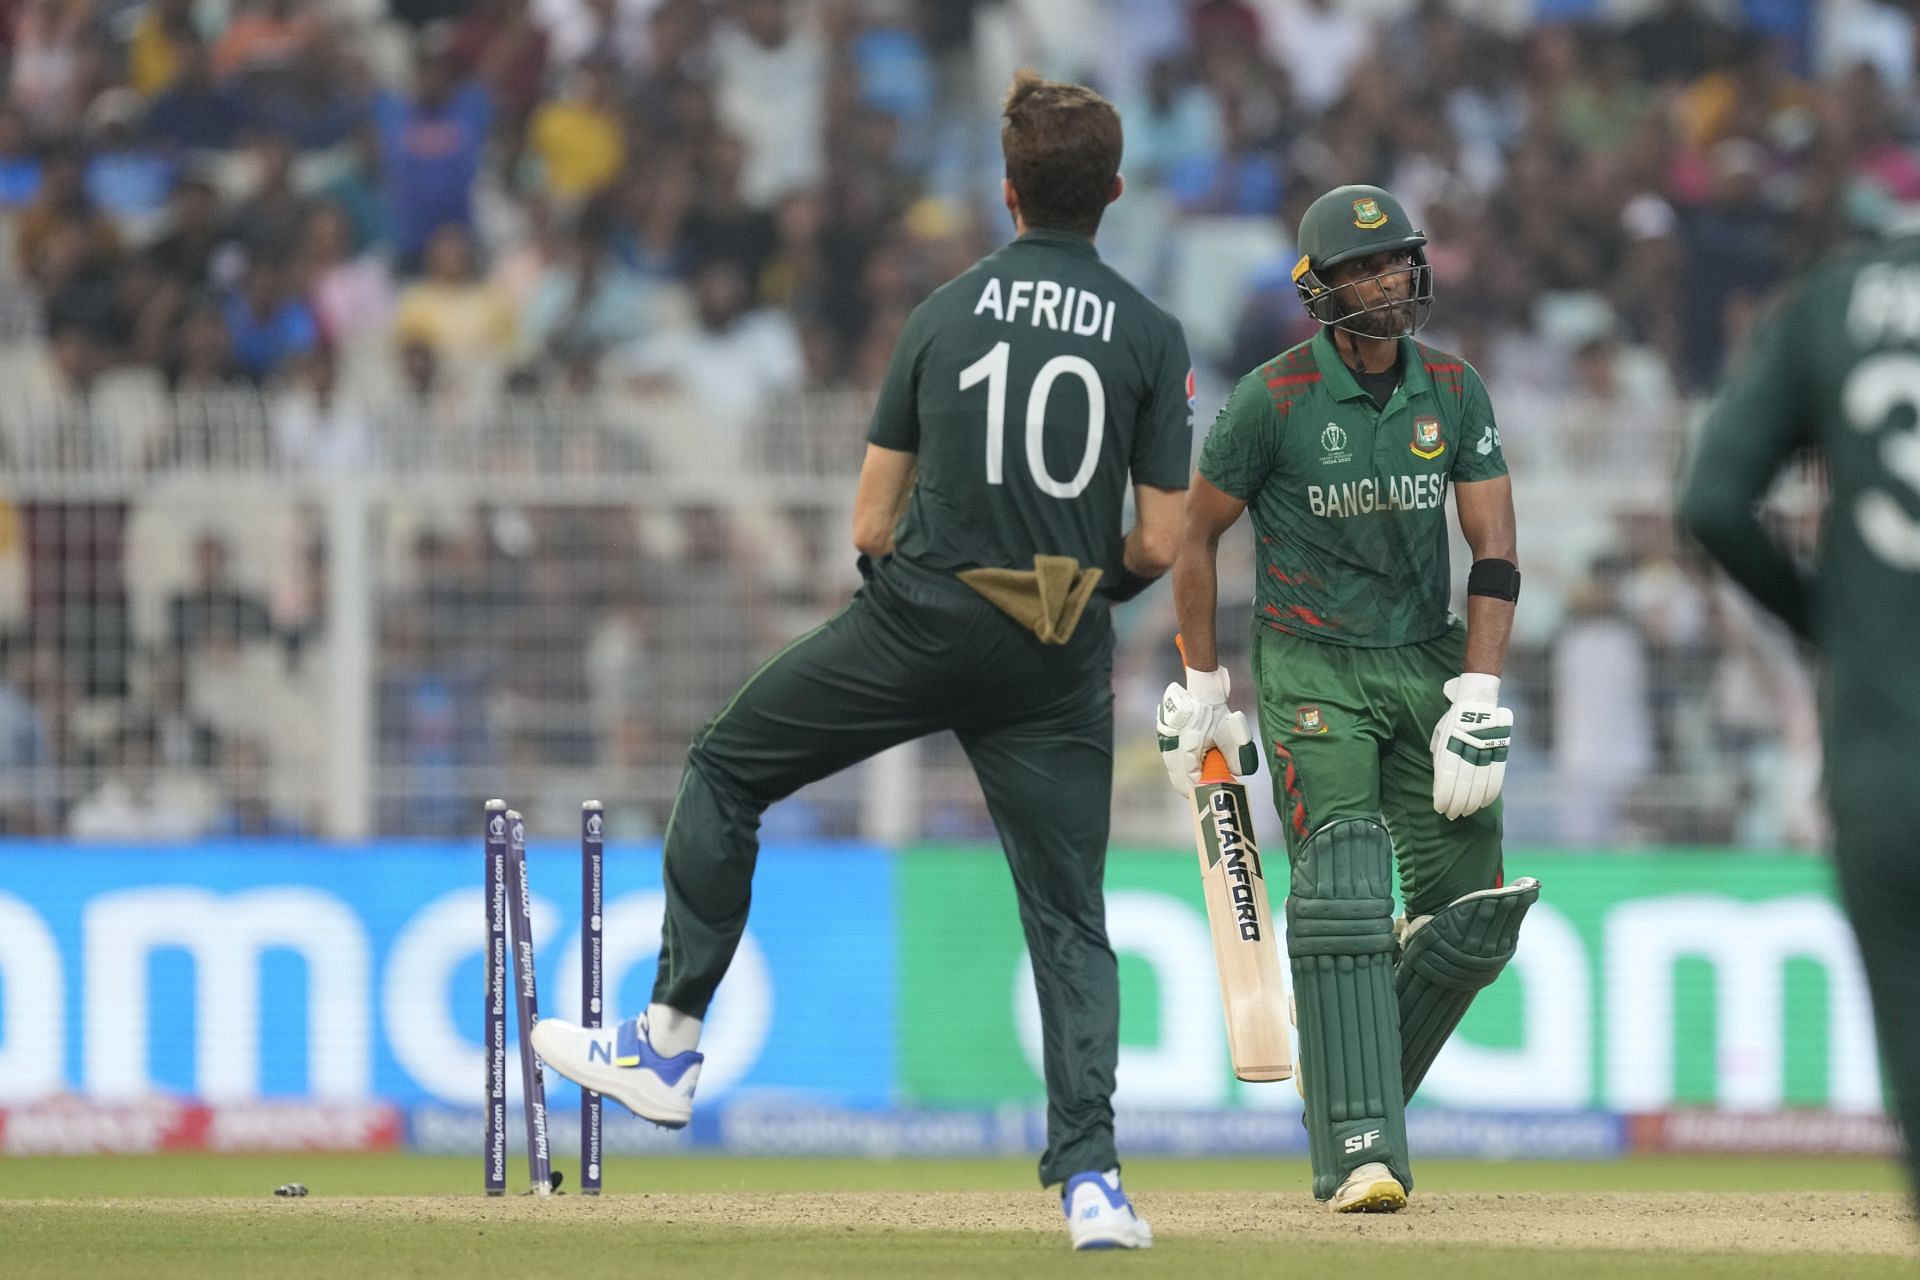 Shaheen Shah Afridi castled Mahmudullah with a delivery that moved away after pitching. [P/C: AP]